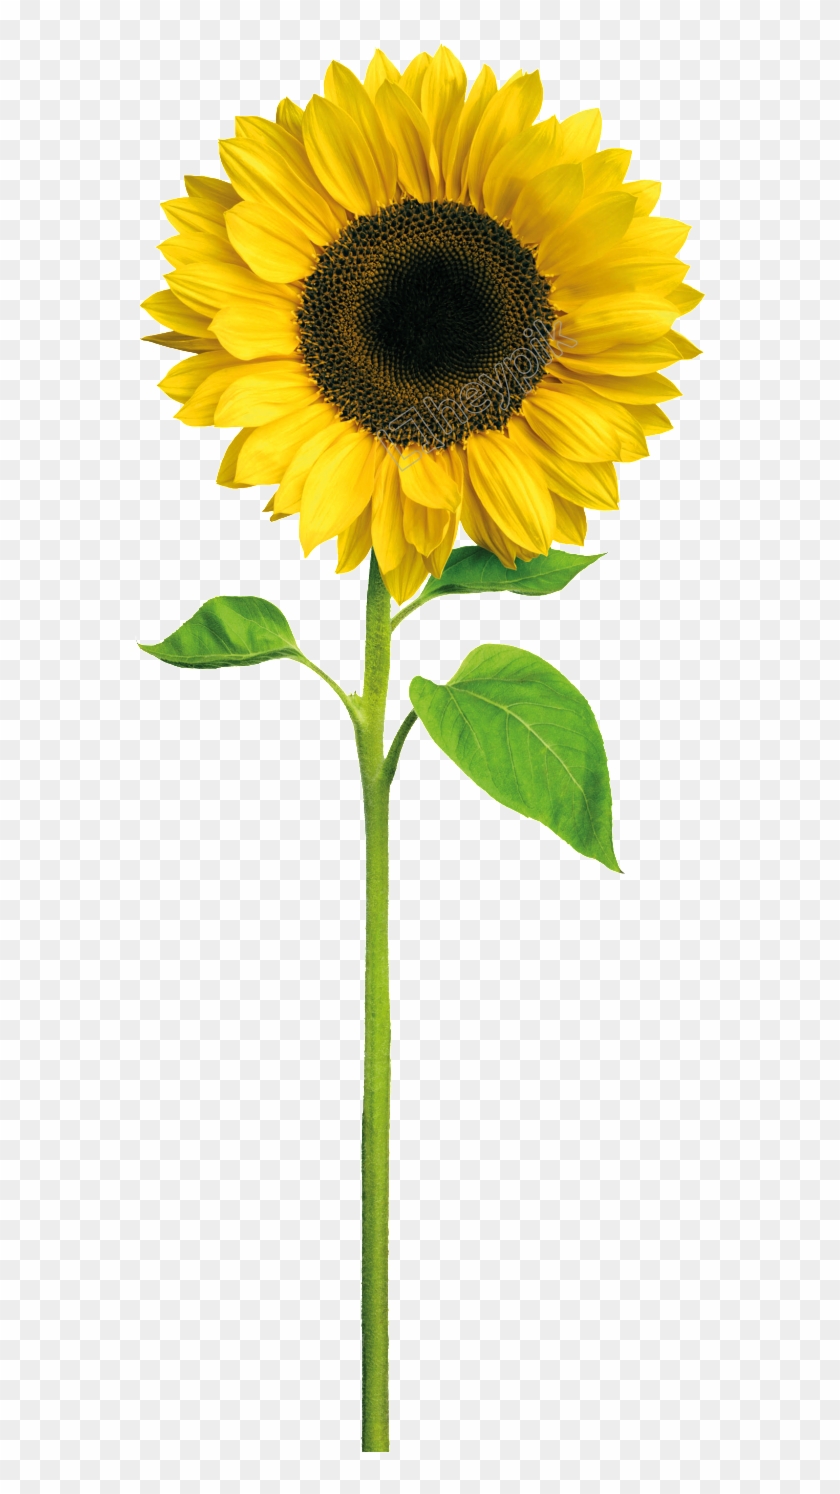 Sunflower Vector Image At Vectorified Com Collection Of Sunflower Vector Image Free For